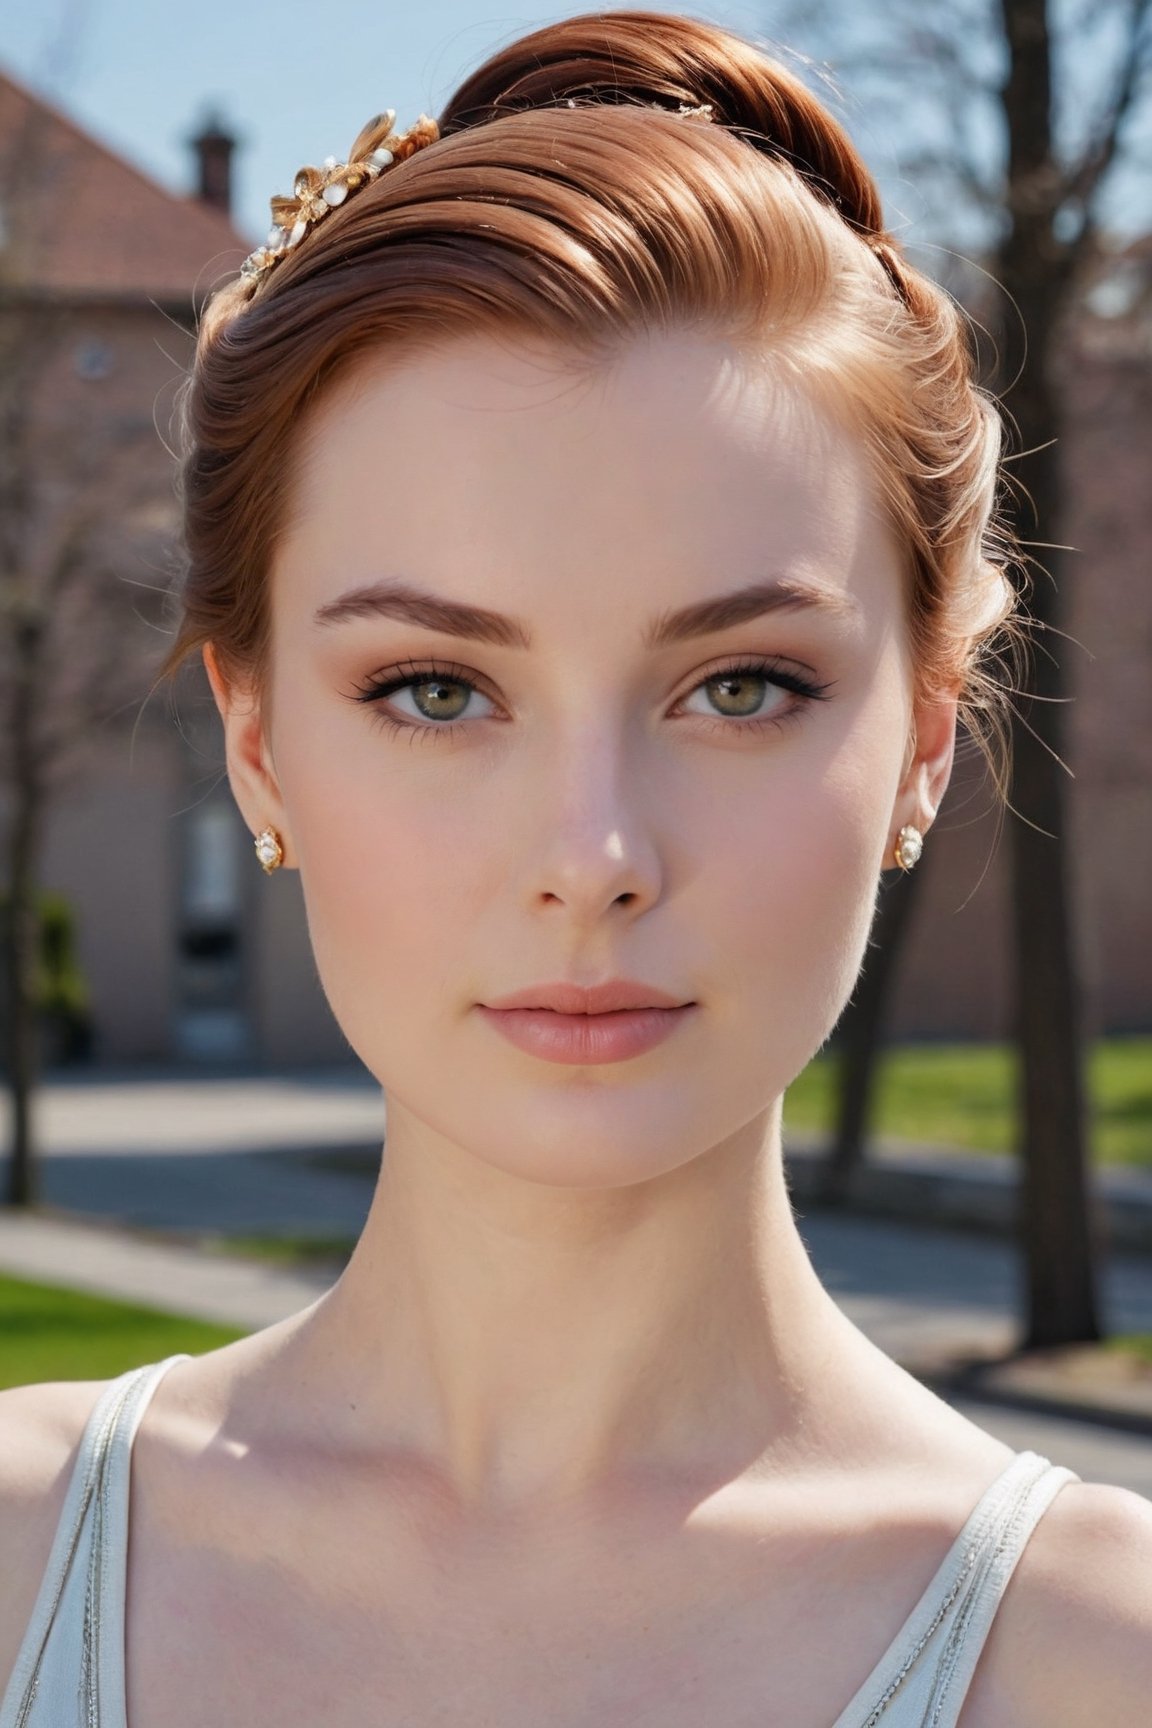 headshot,Nudity,Naked,Nude,No Clothes,Auburn hair,face similar to Grace Kelly,Russian,pale skin,Top Knot Hairstyle,Metallic makeup,21 year old,Boyish_normal_breasts,headshot,Sunny Day Spring,Posing for a photo


